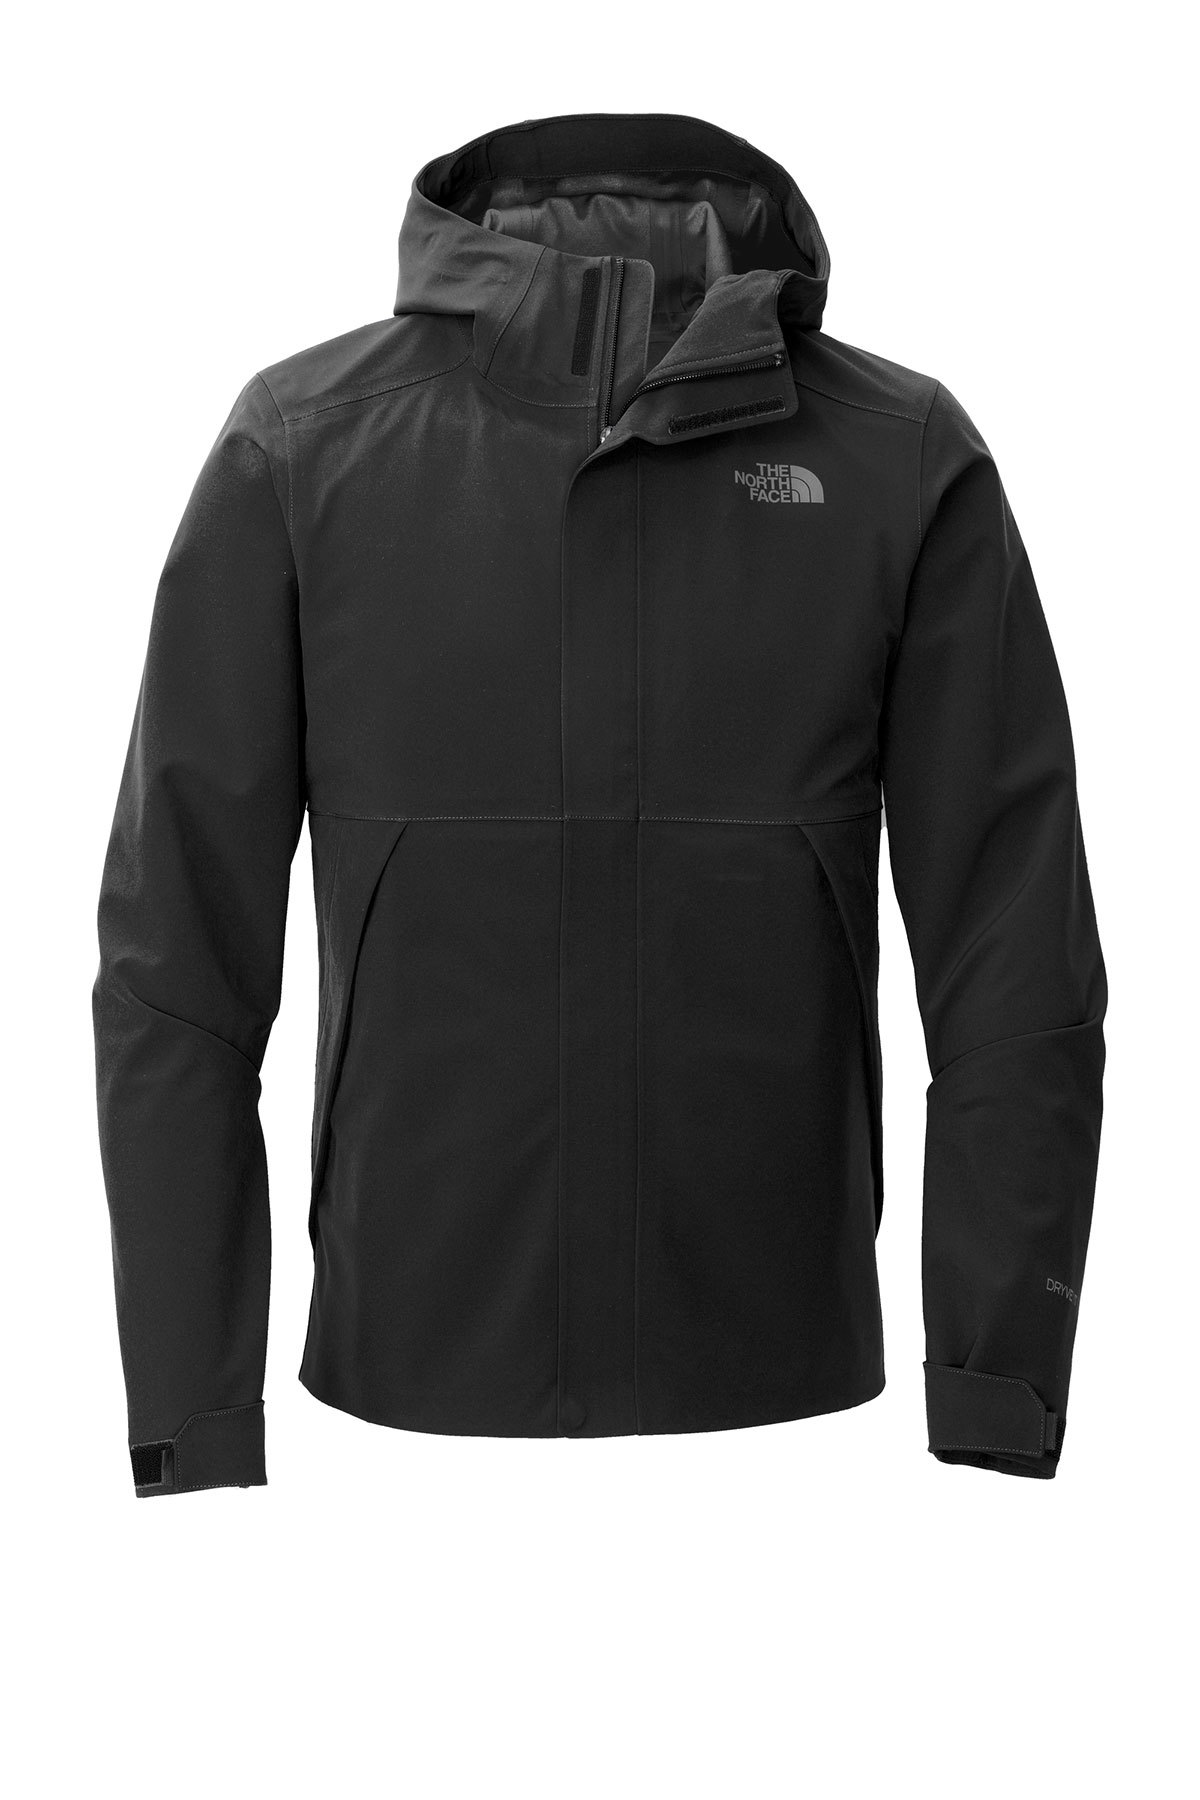 The North Face Apex DryVent Jacket | Product | SanMar